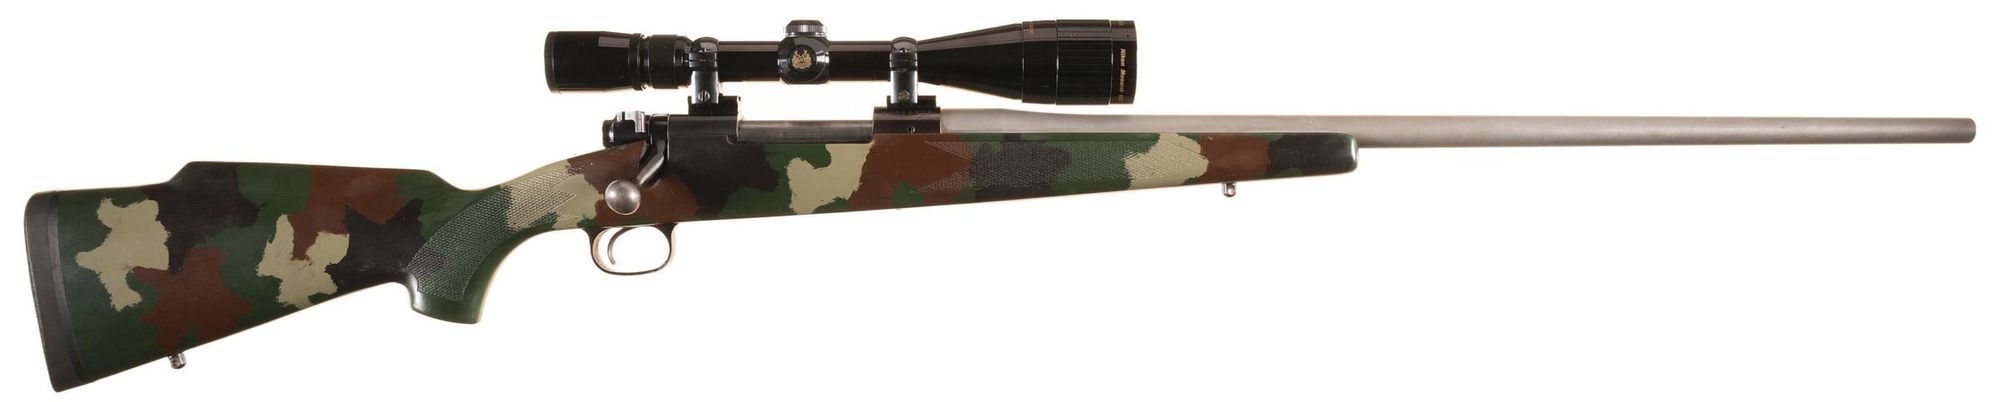 Lot 3114: Winchester-Tooley Custom Model 70 Bolt Action Rifle with Scope